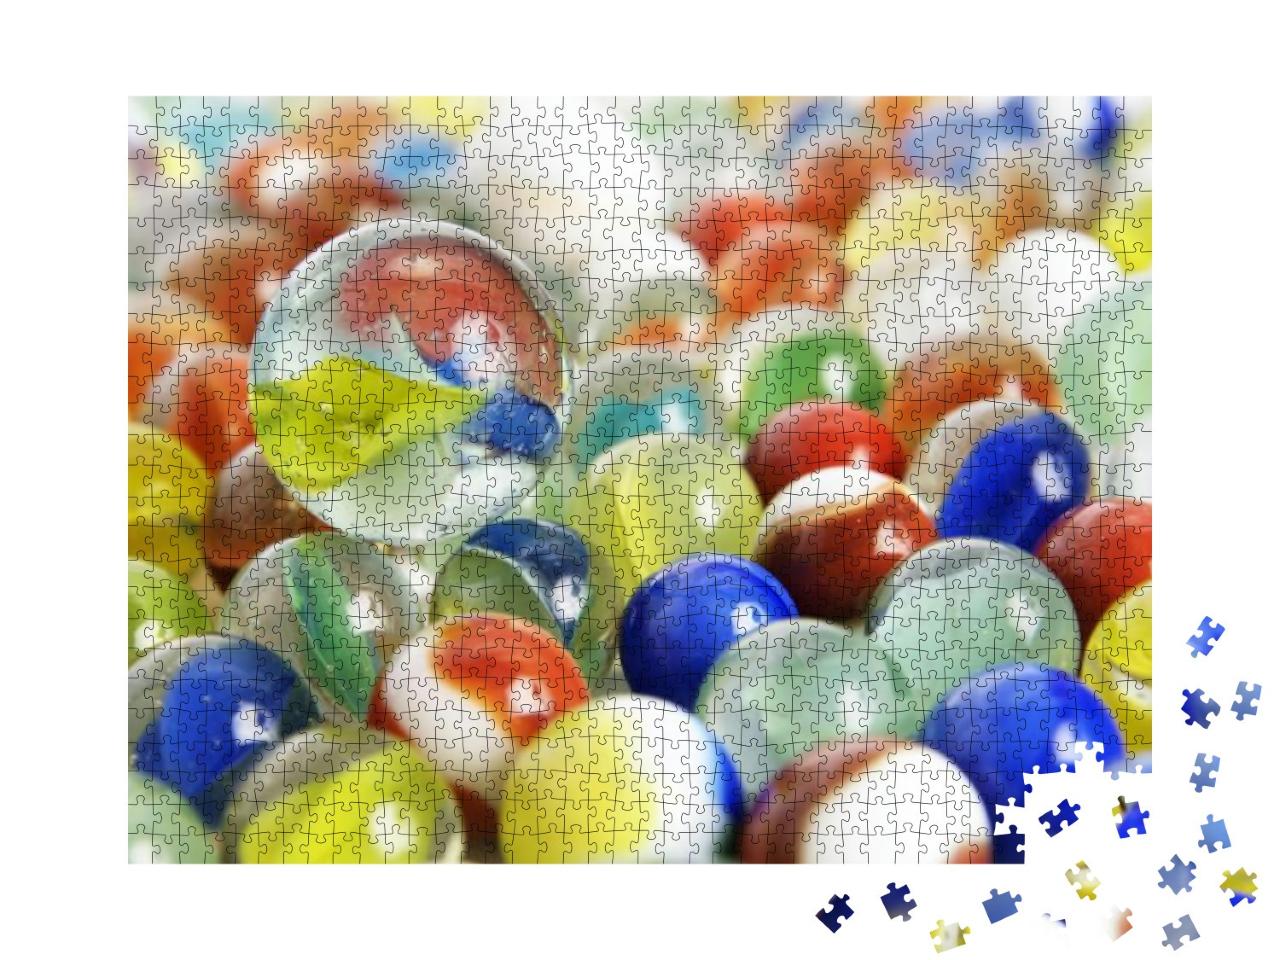 Colorful Children's Marbles Assorted on a White Backgroun... Jigsaw Puzzle with 1000 pieces